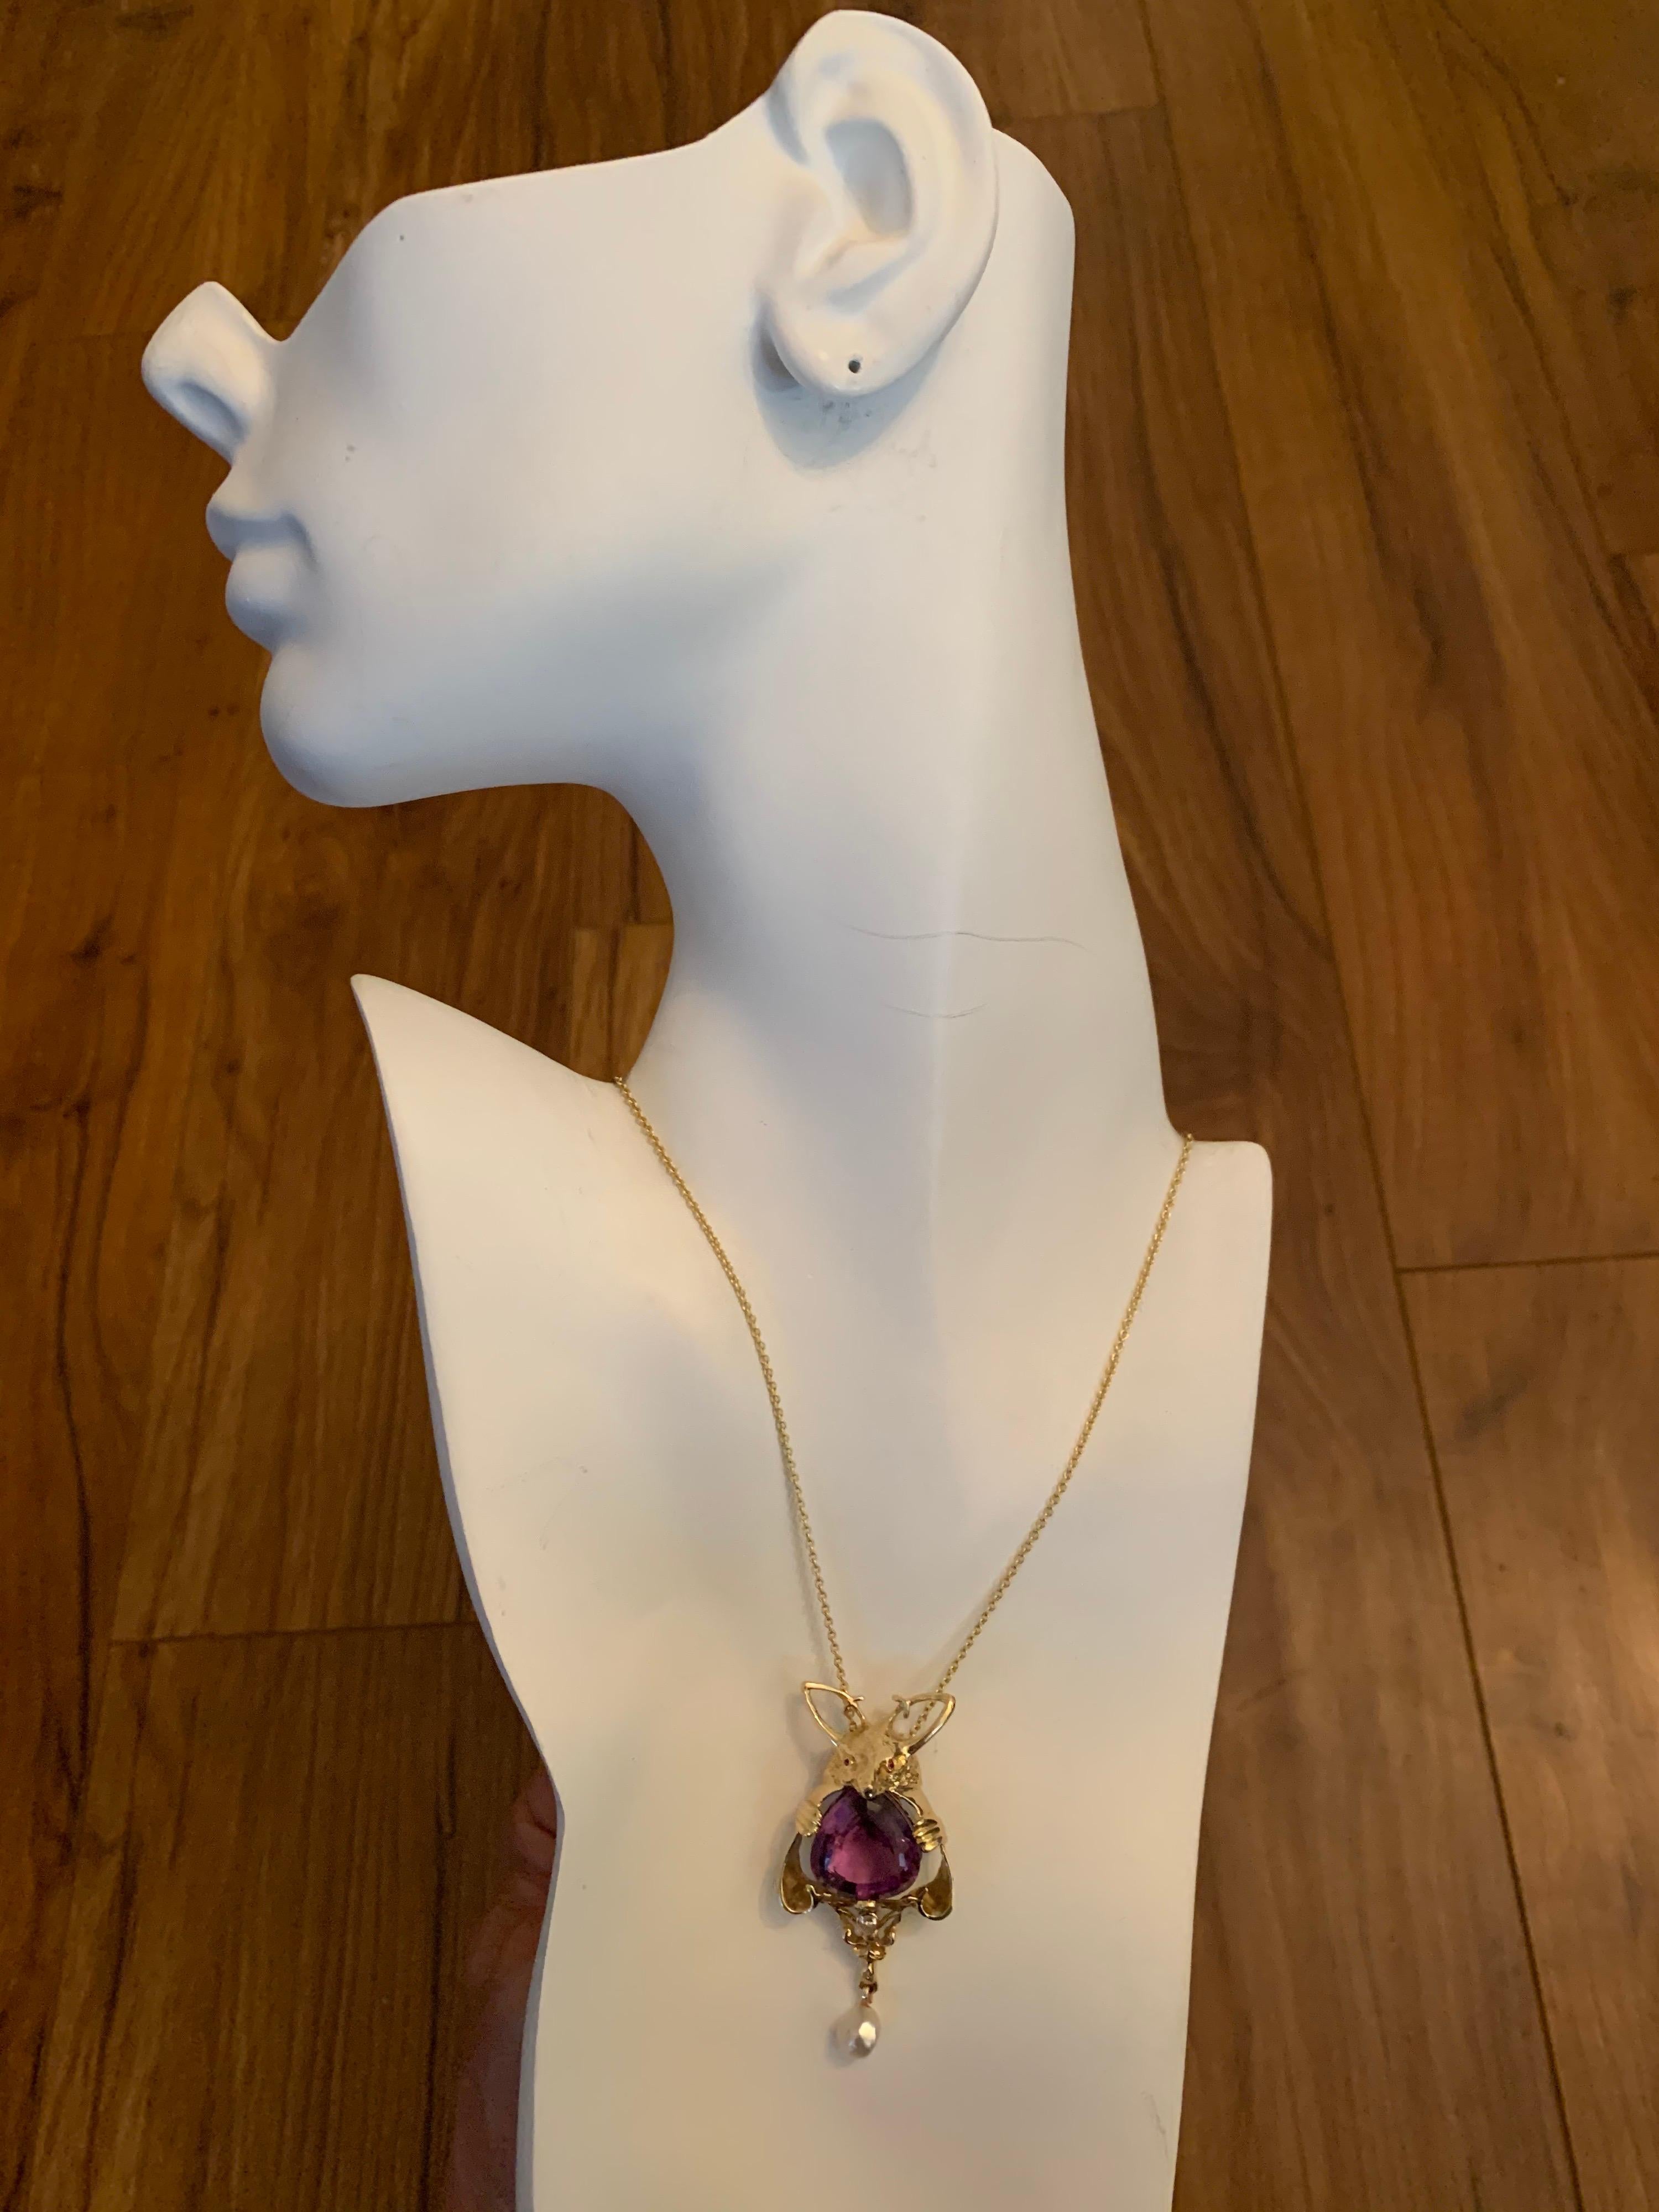 Retro 14k Yellow Gold Kangaroo Pendant set with Natural 0.12 carat pear shaped diamond (4x3.5mm) & 25 carat Amethyst (20x18x12.2mm). Carat weights are approximate.

The total weight of the piece is 22.2 grams. Chain not included.

Condition is